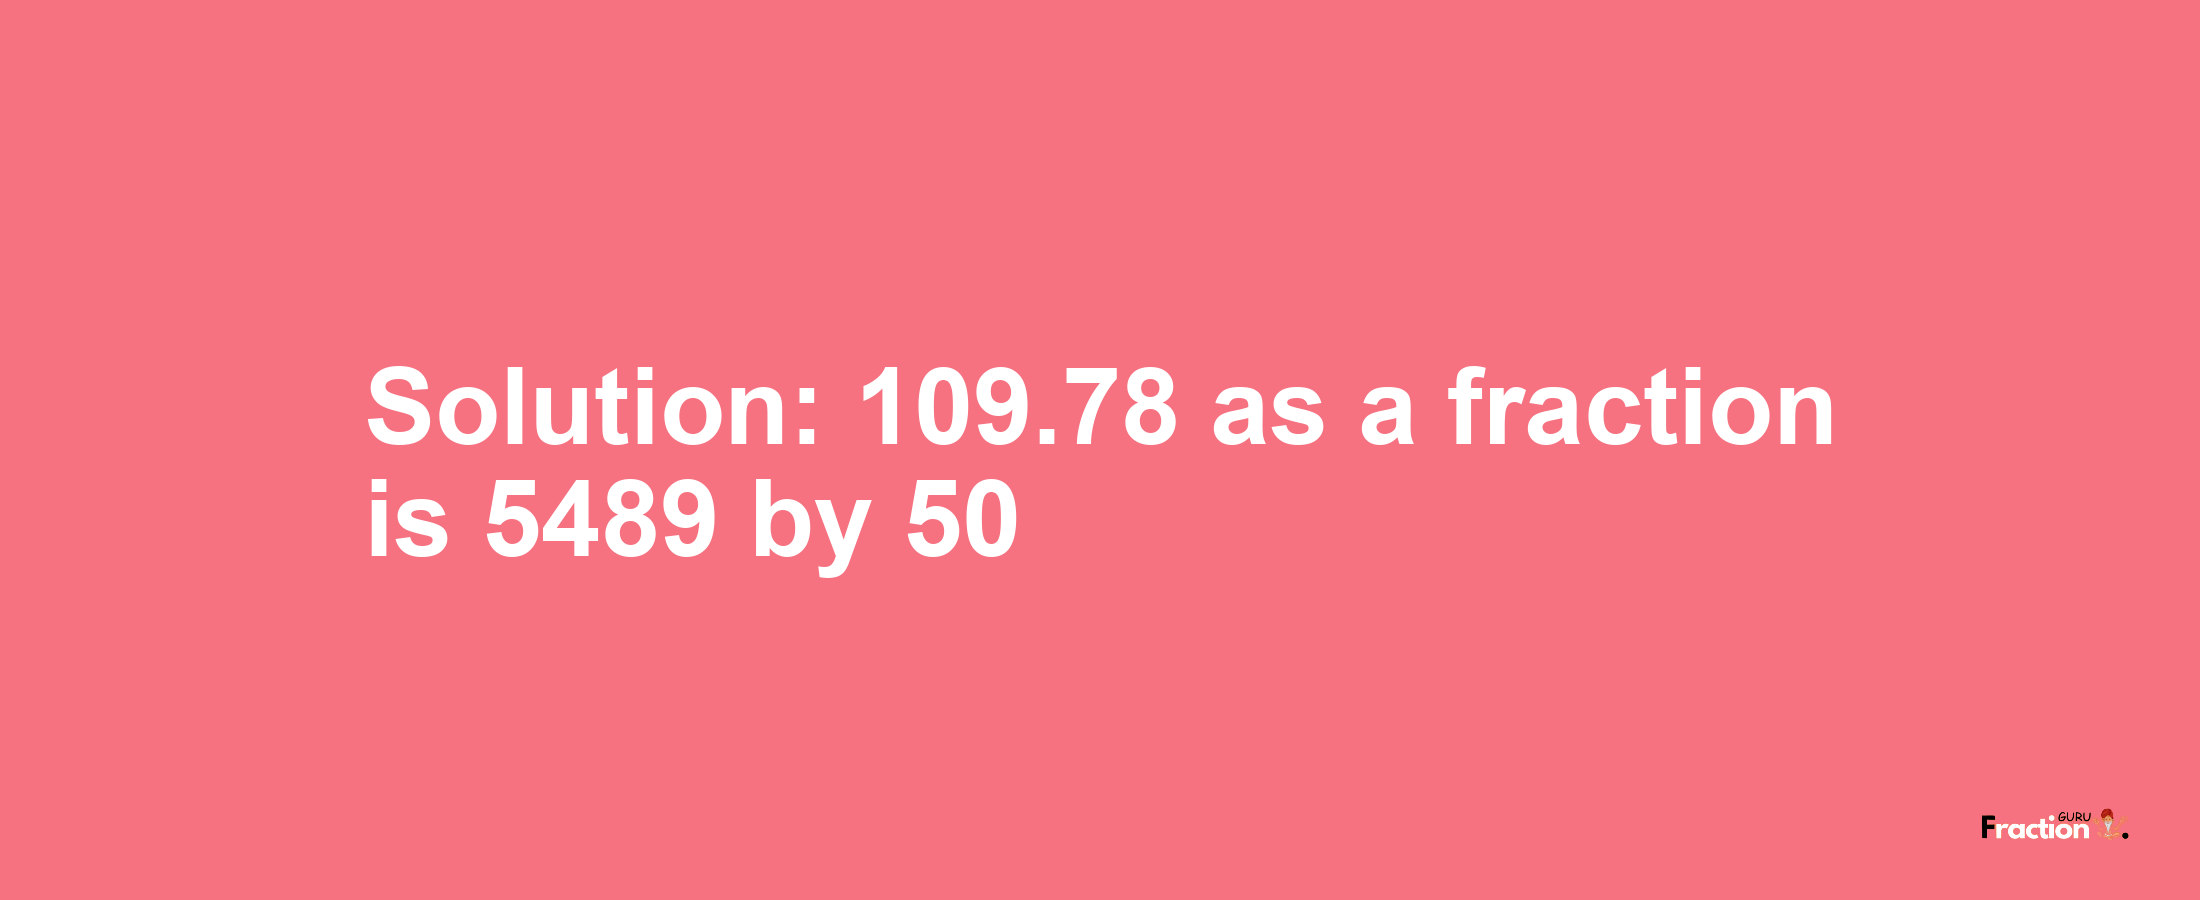 Solution:109.78 as a fraction is 5489/50